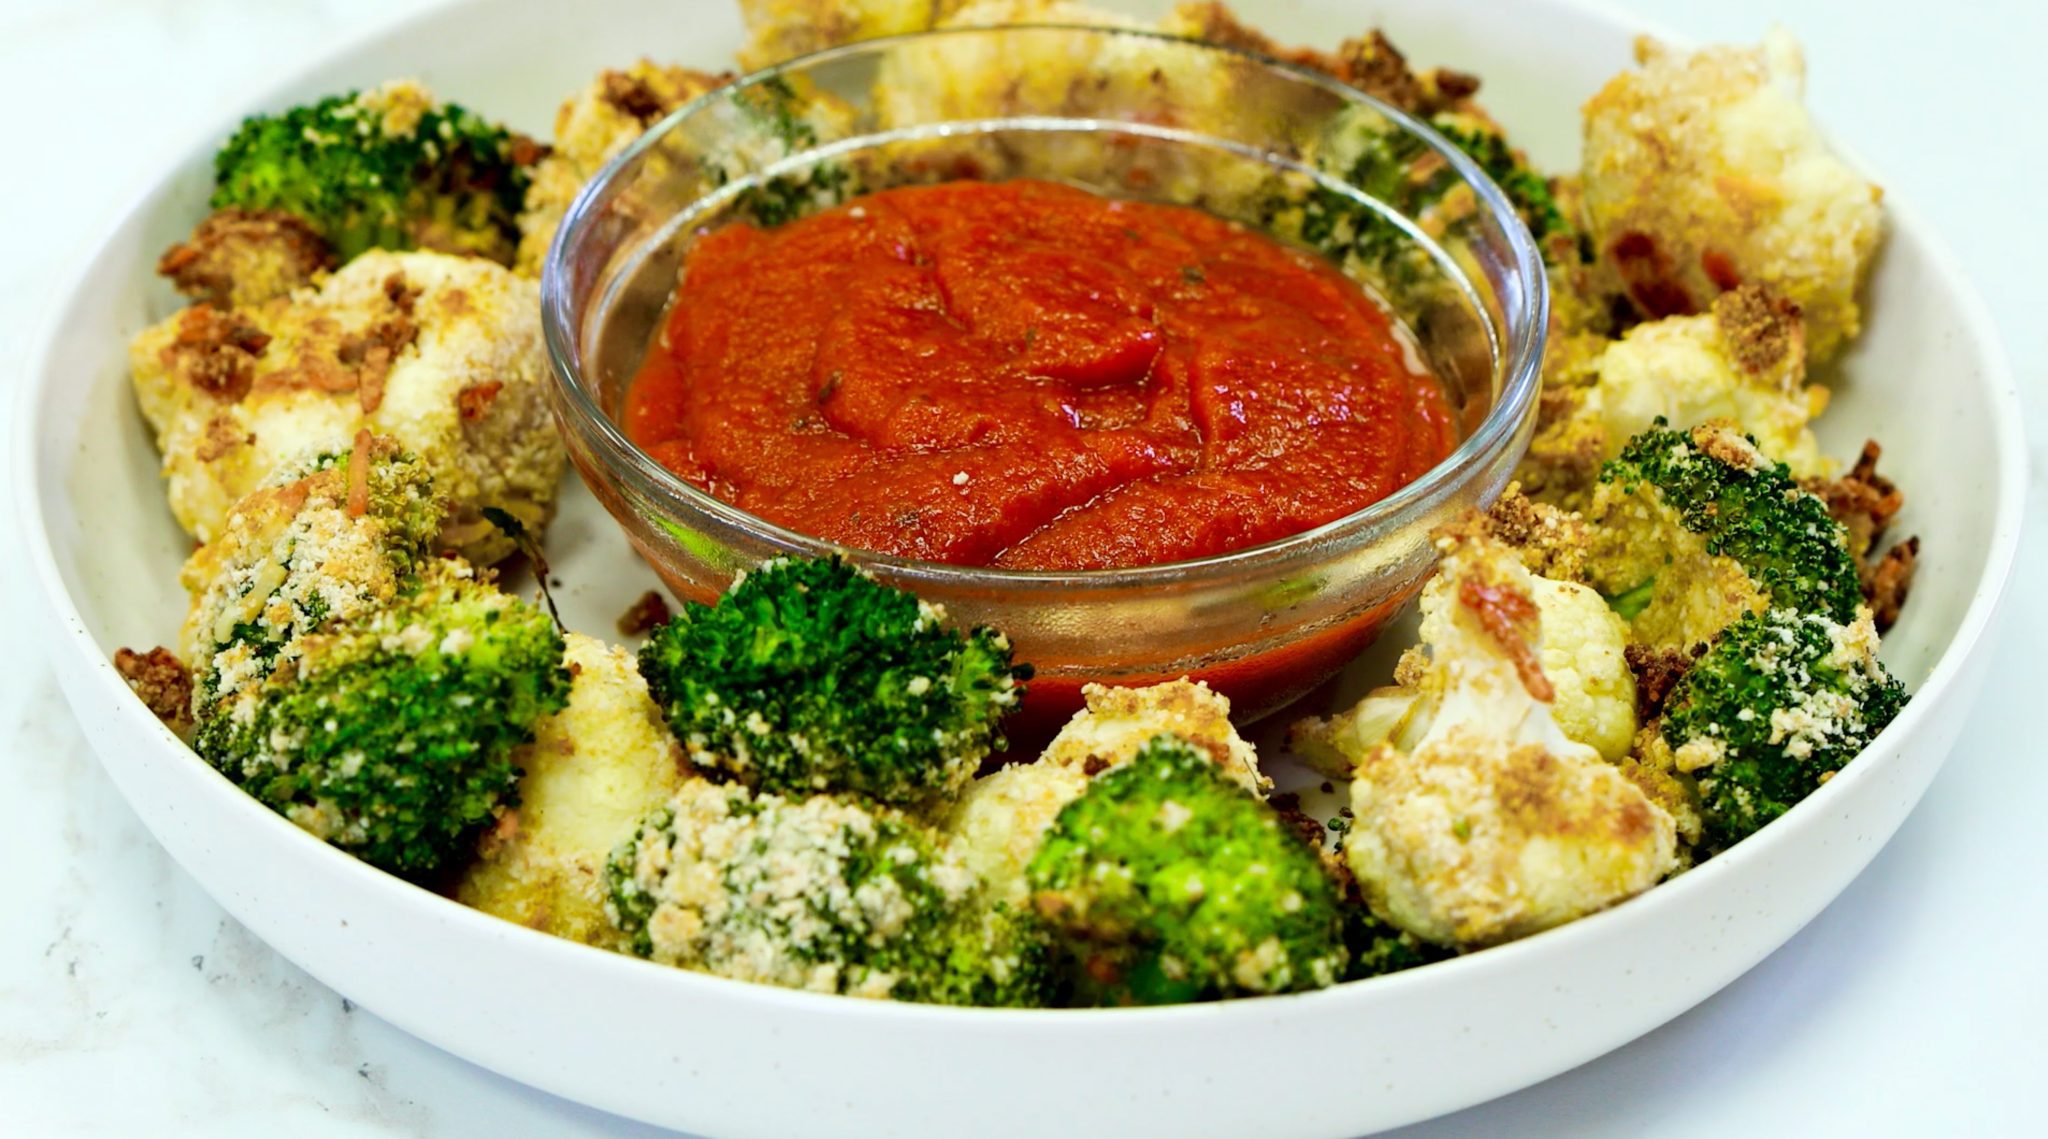 Tree Dunkers, broccoli and cauliflower around red sauce in clear bowl